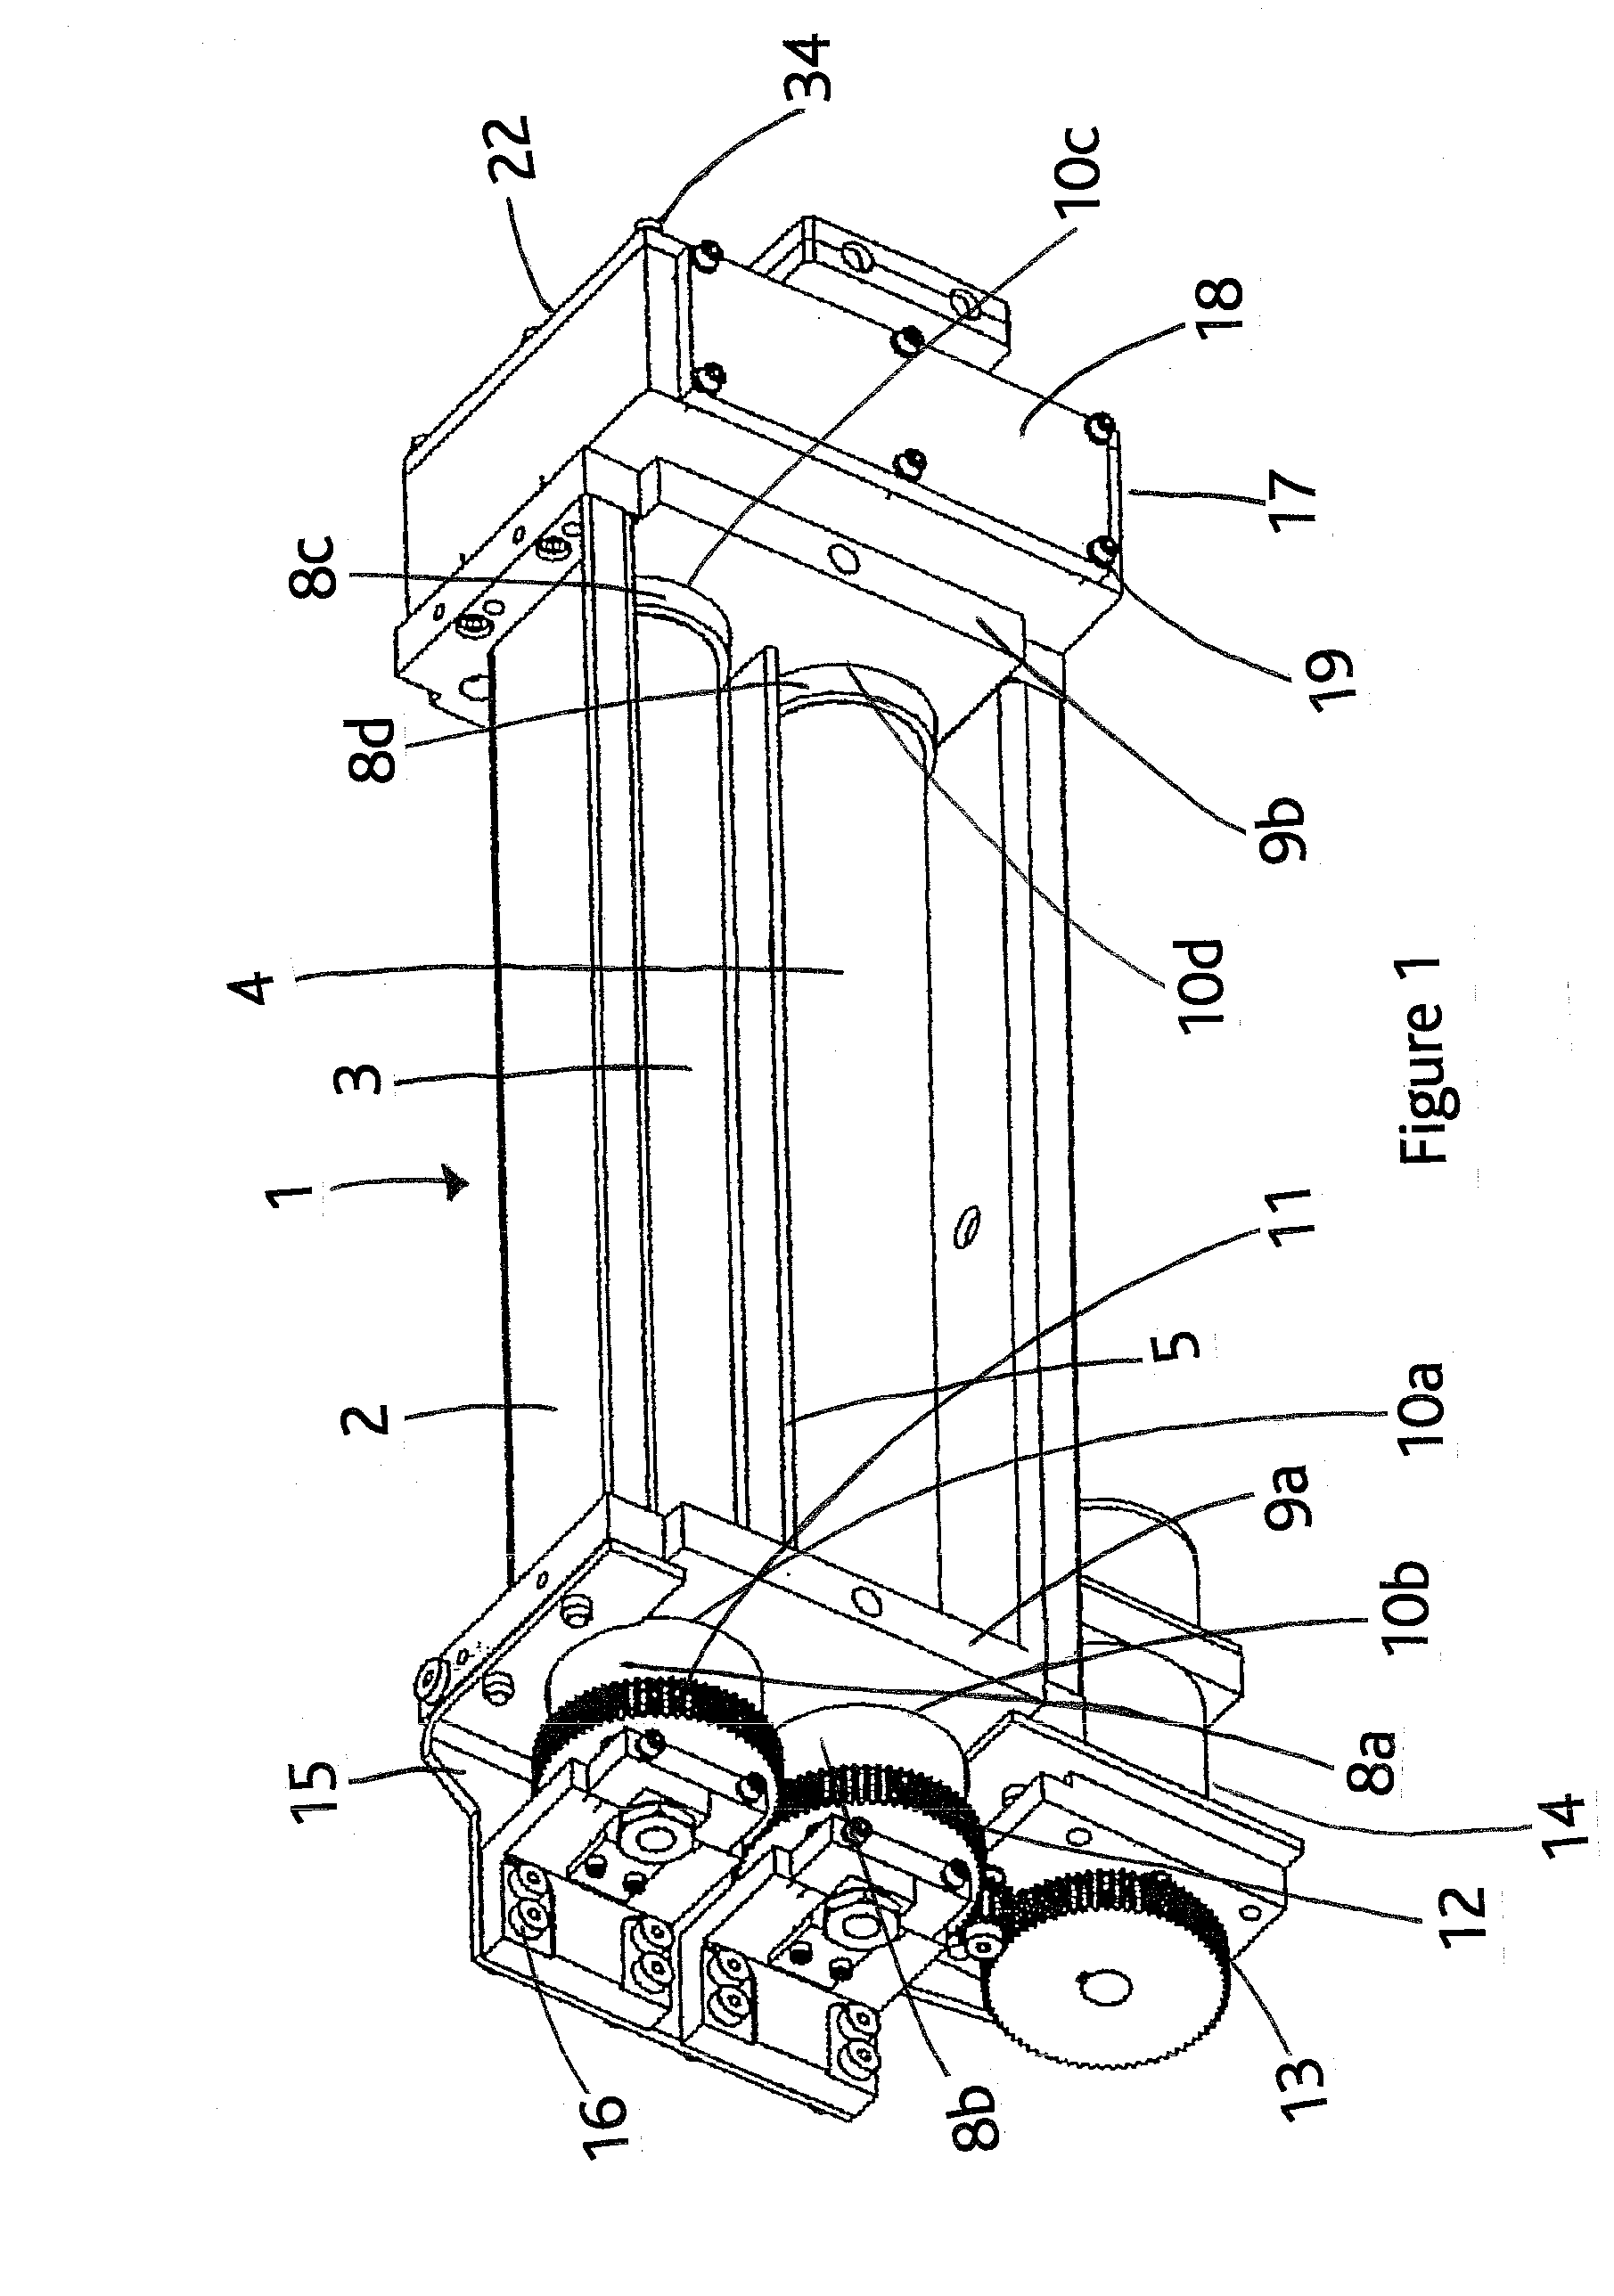 Apparatus for treating substrates